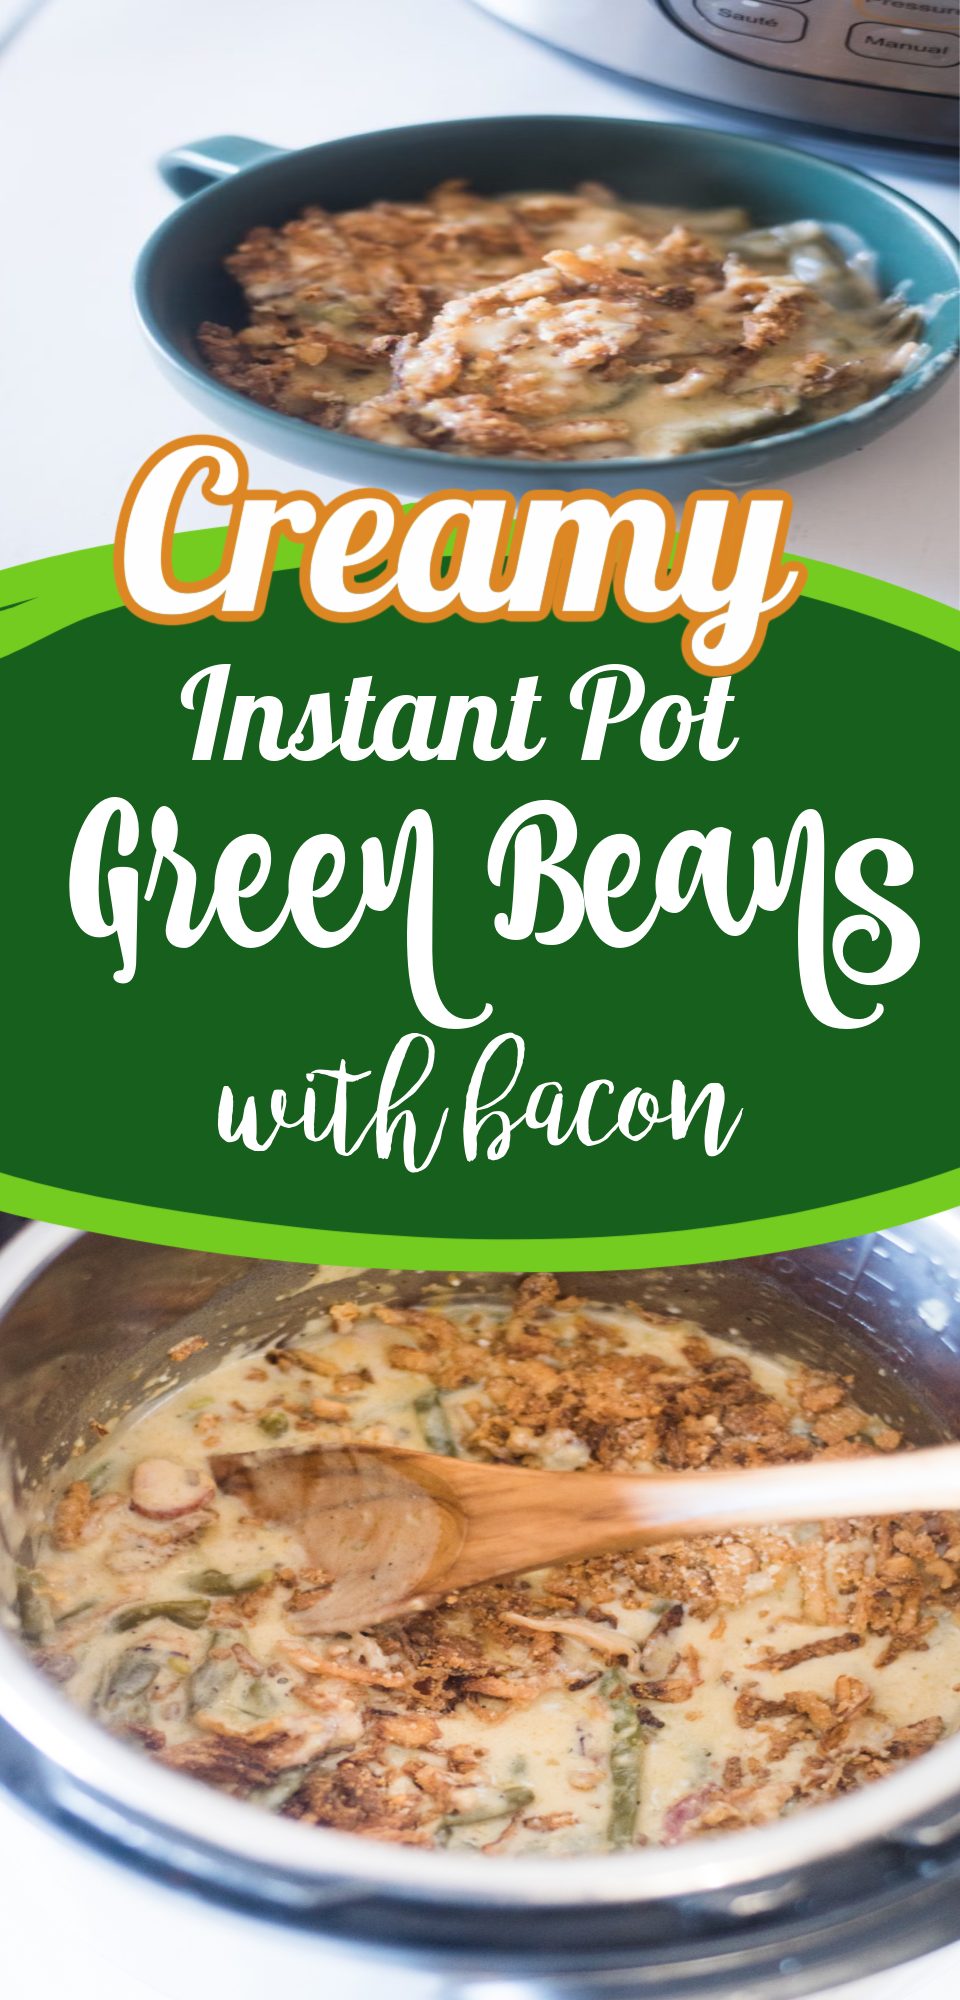 Easy and creamy Instant Pot Green Bean Casserole - absolutely AMAZING!